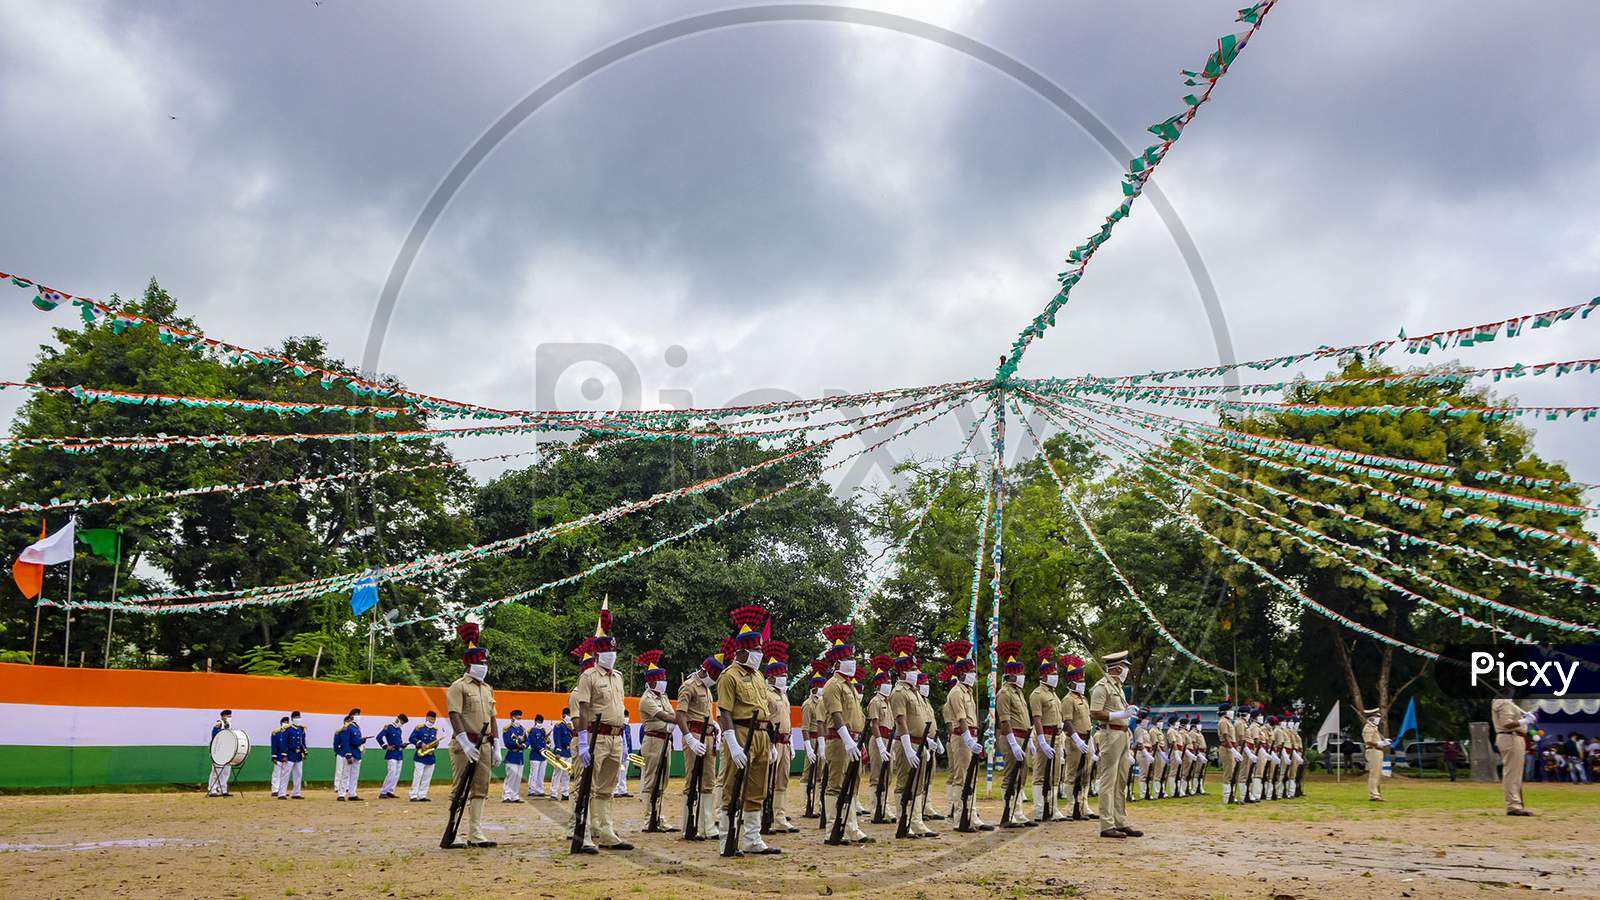 74th Independence Celebration at Midnapore (WB)